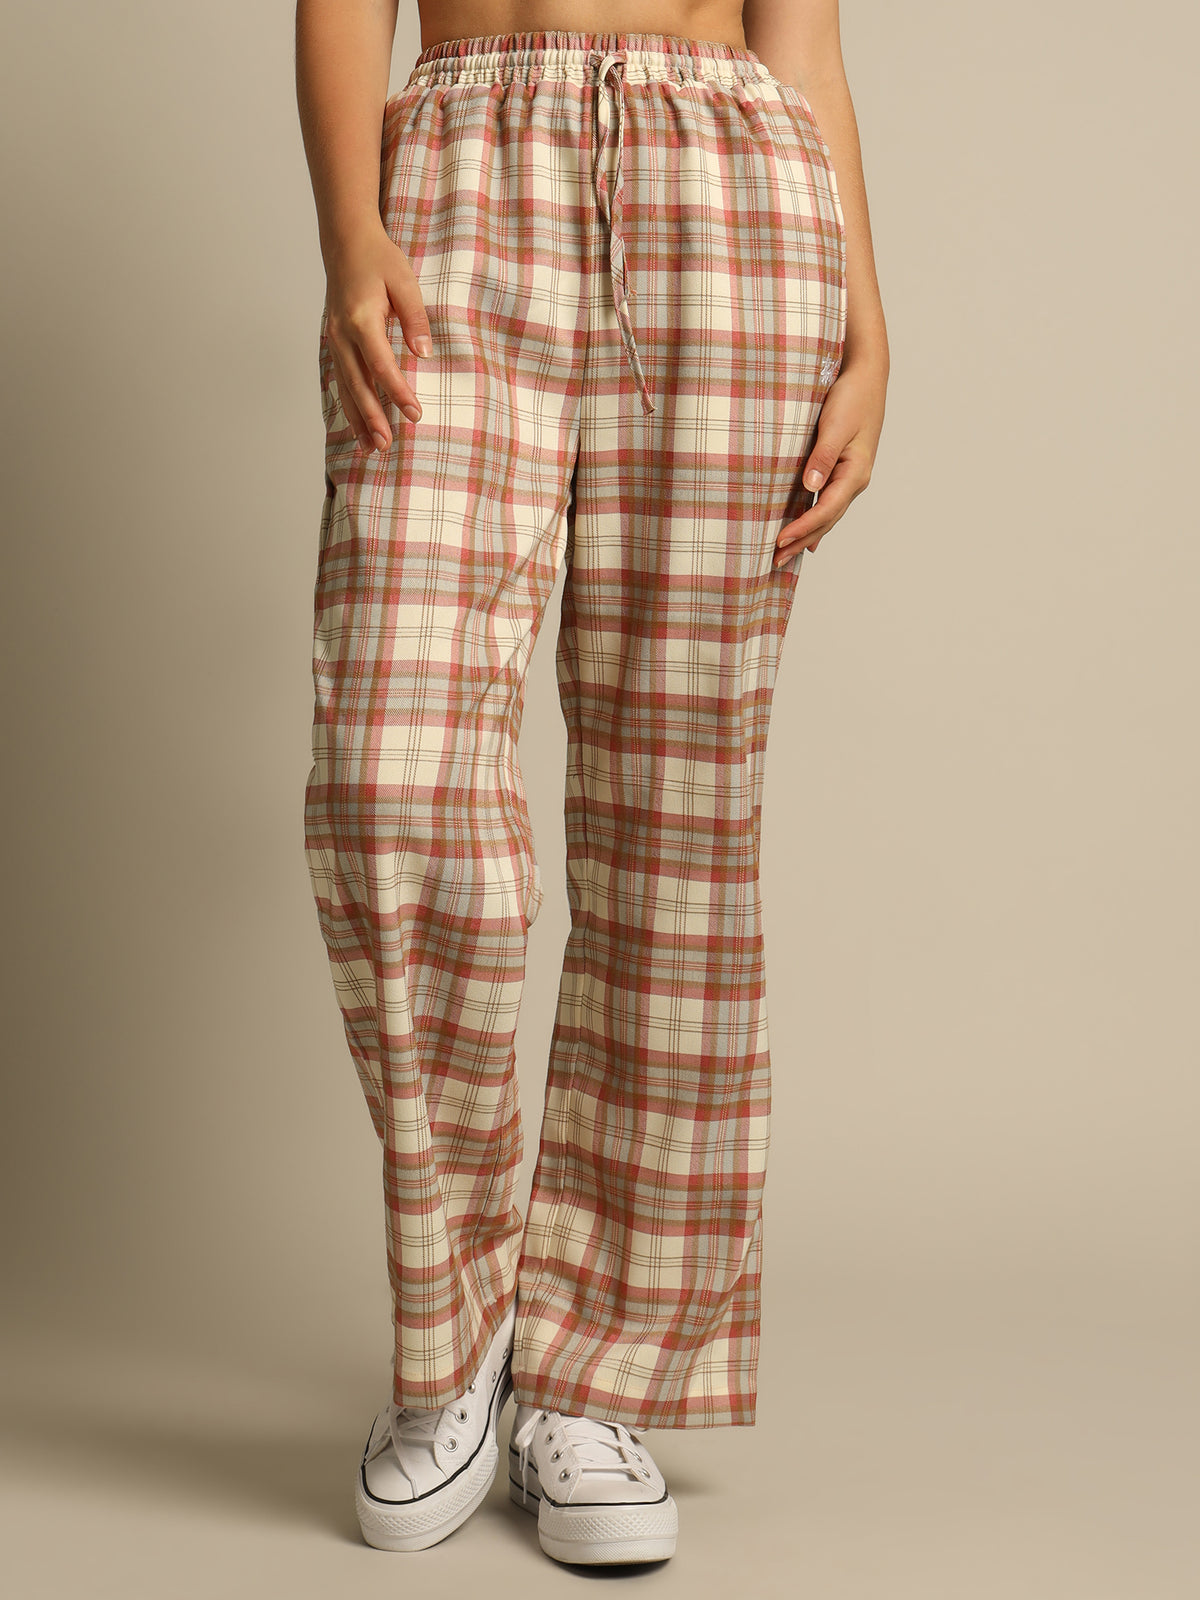 Sutton Check Pants in Off White